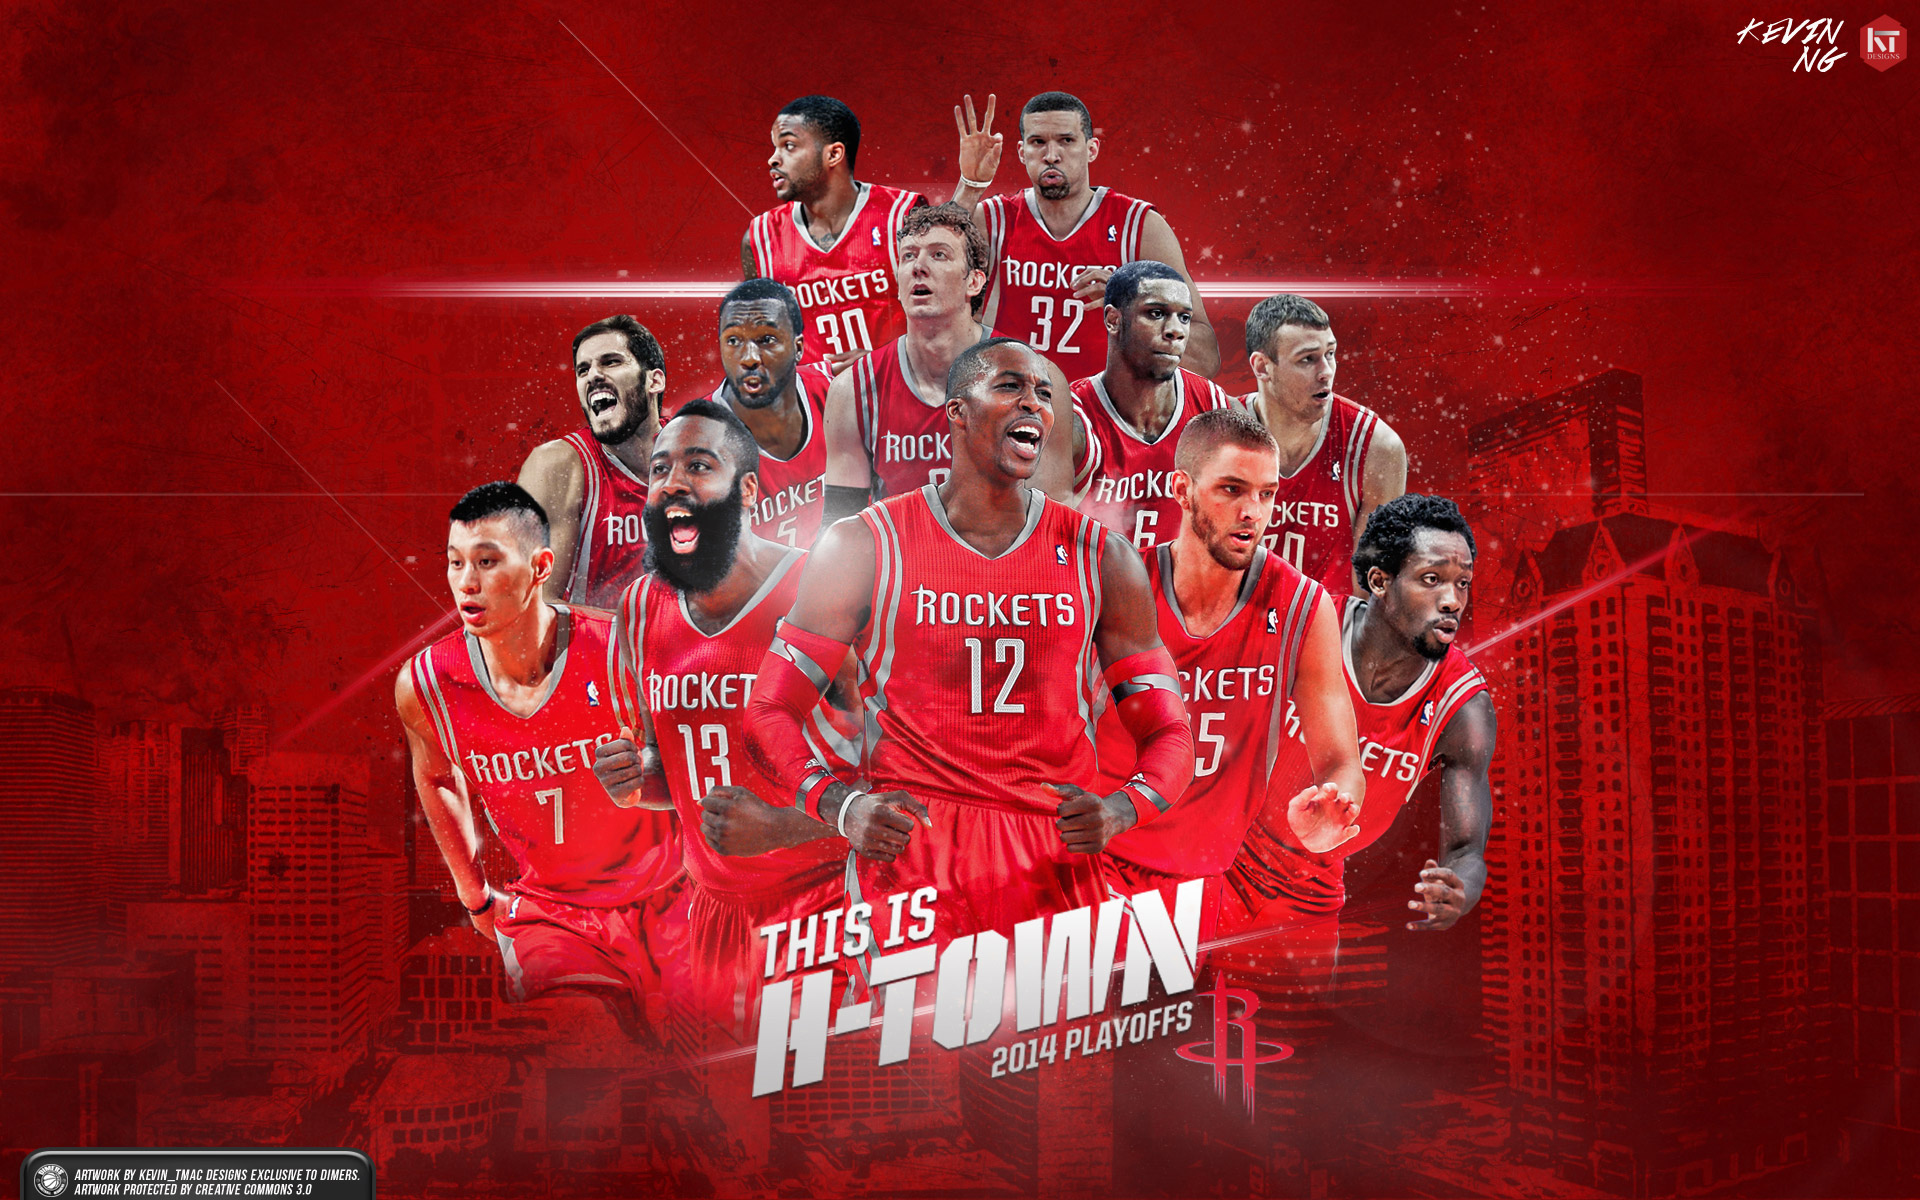 Wallpaper For Today Is Houston Rockets Fans A Widescreen